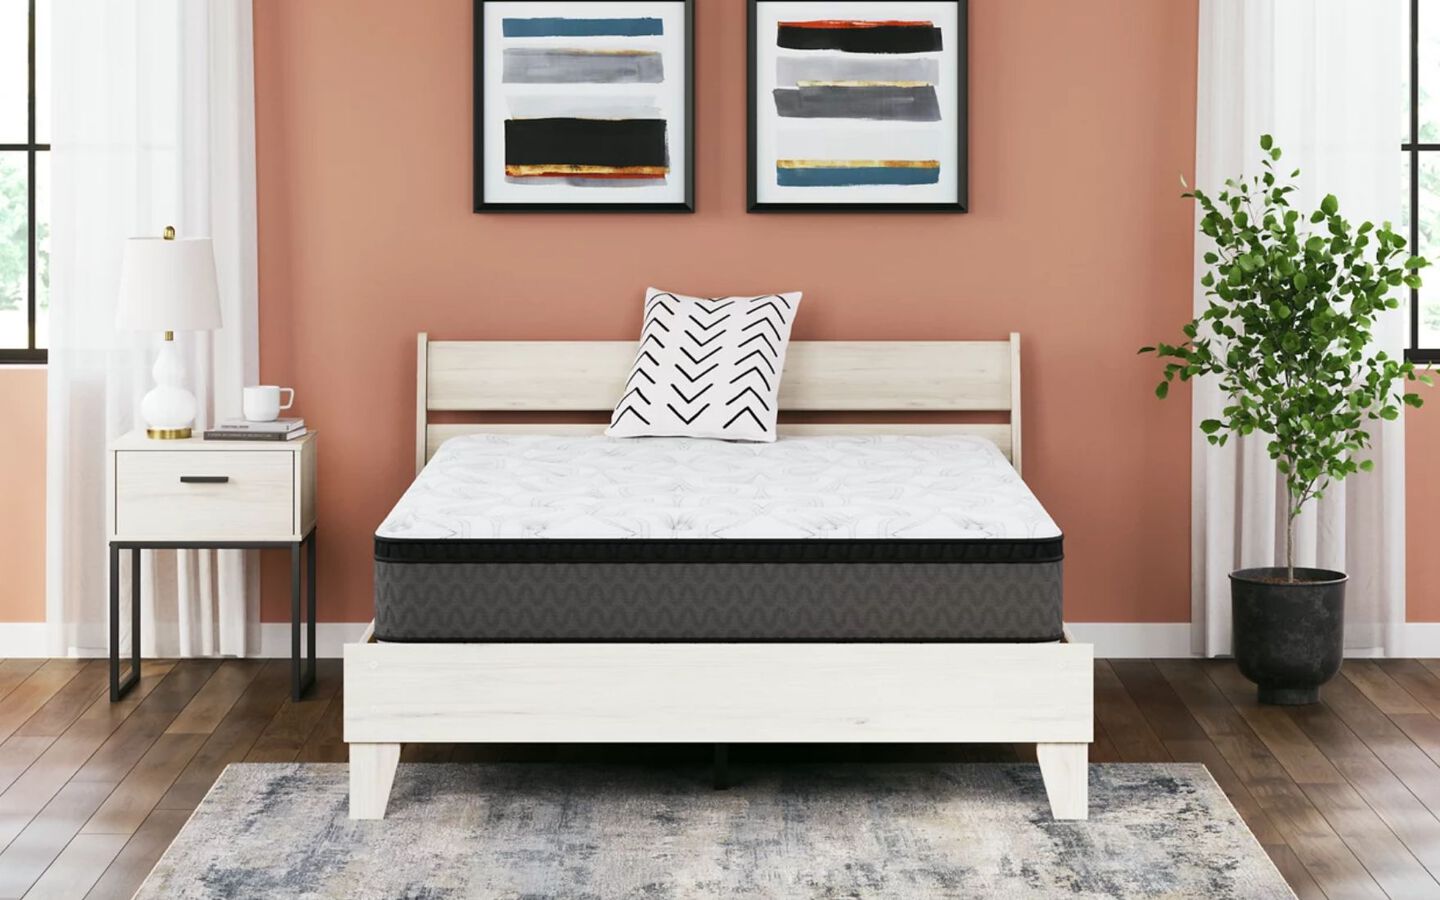 Grey and black mattress on a white bedframe in a bedroom